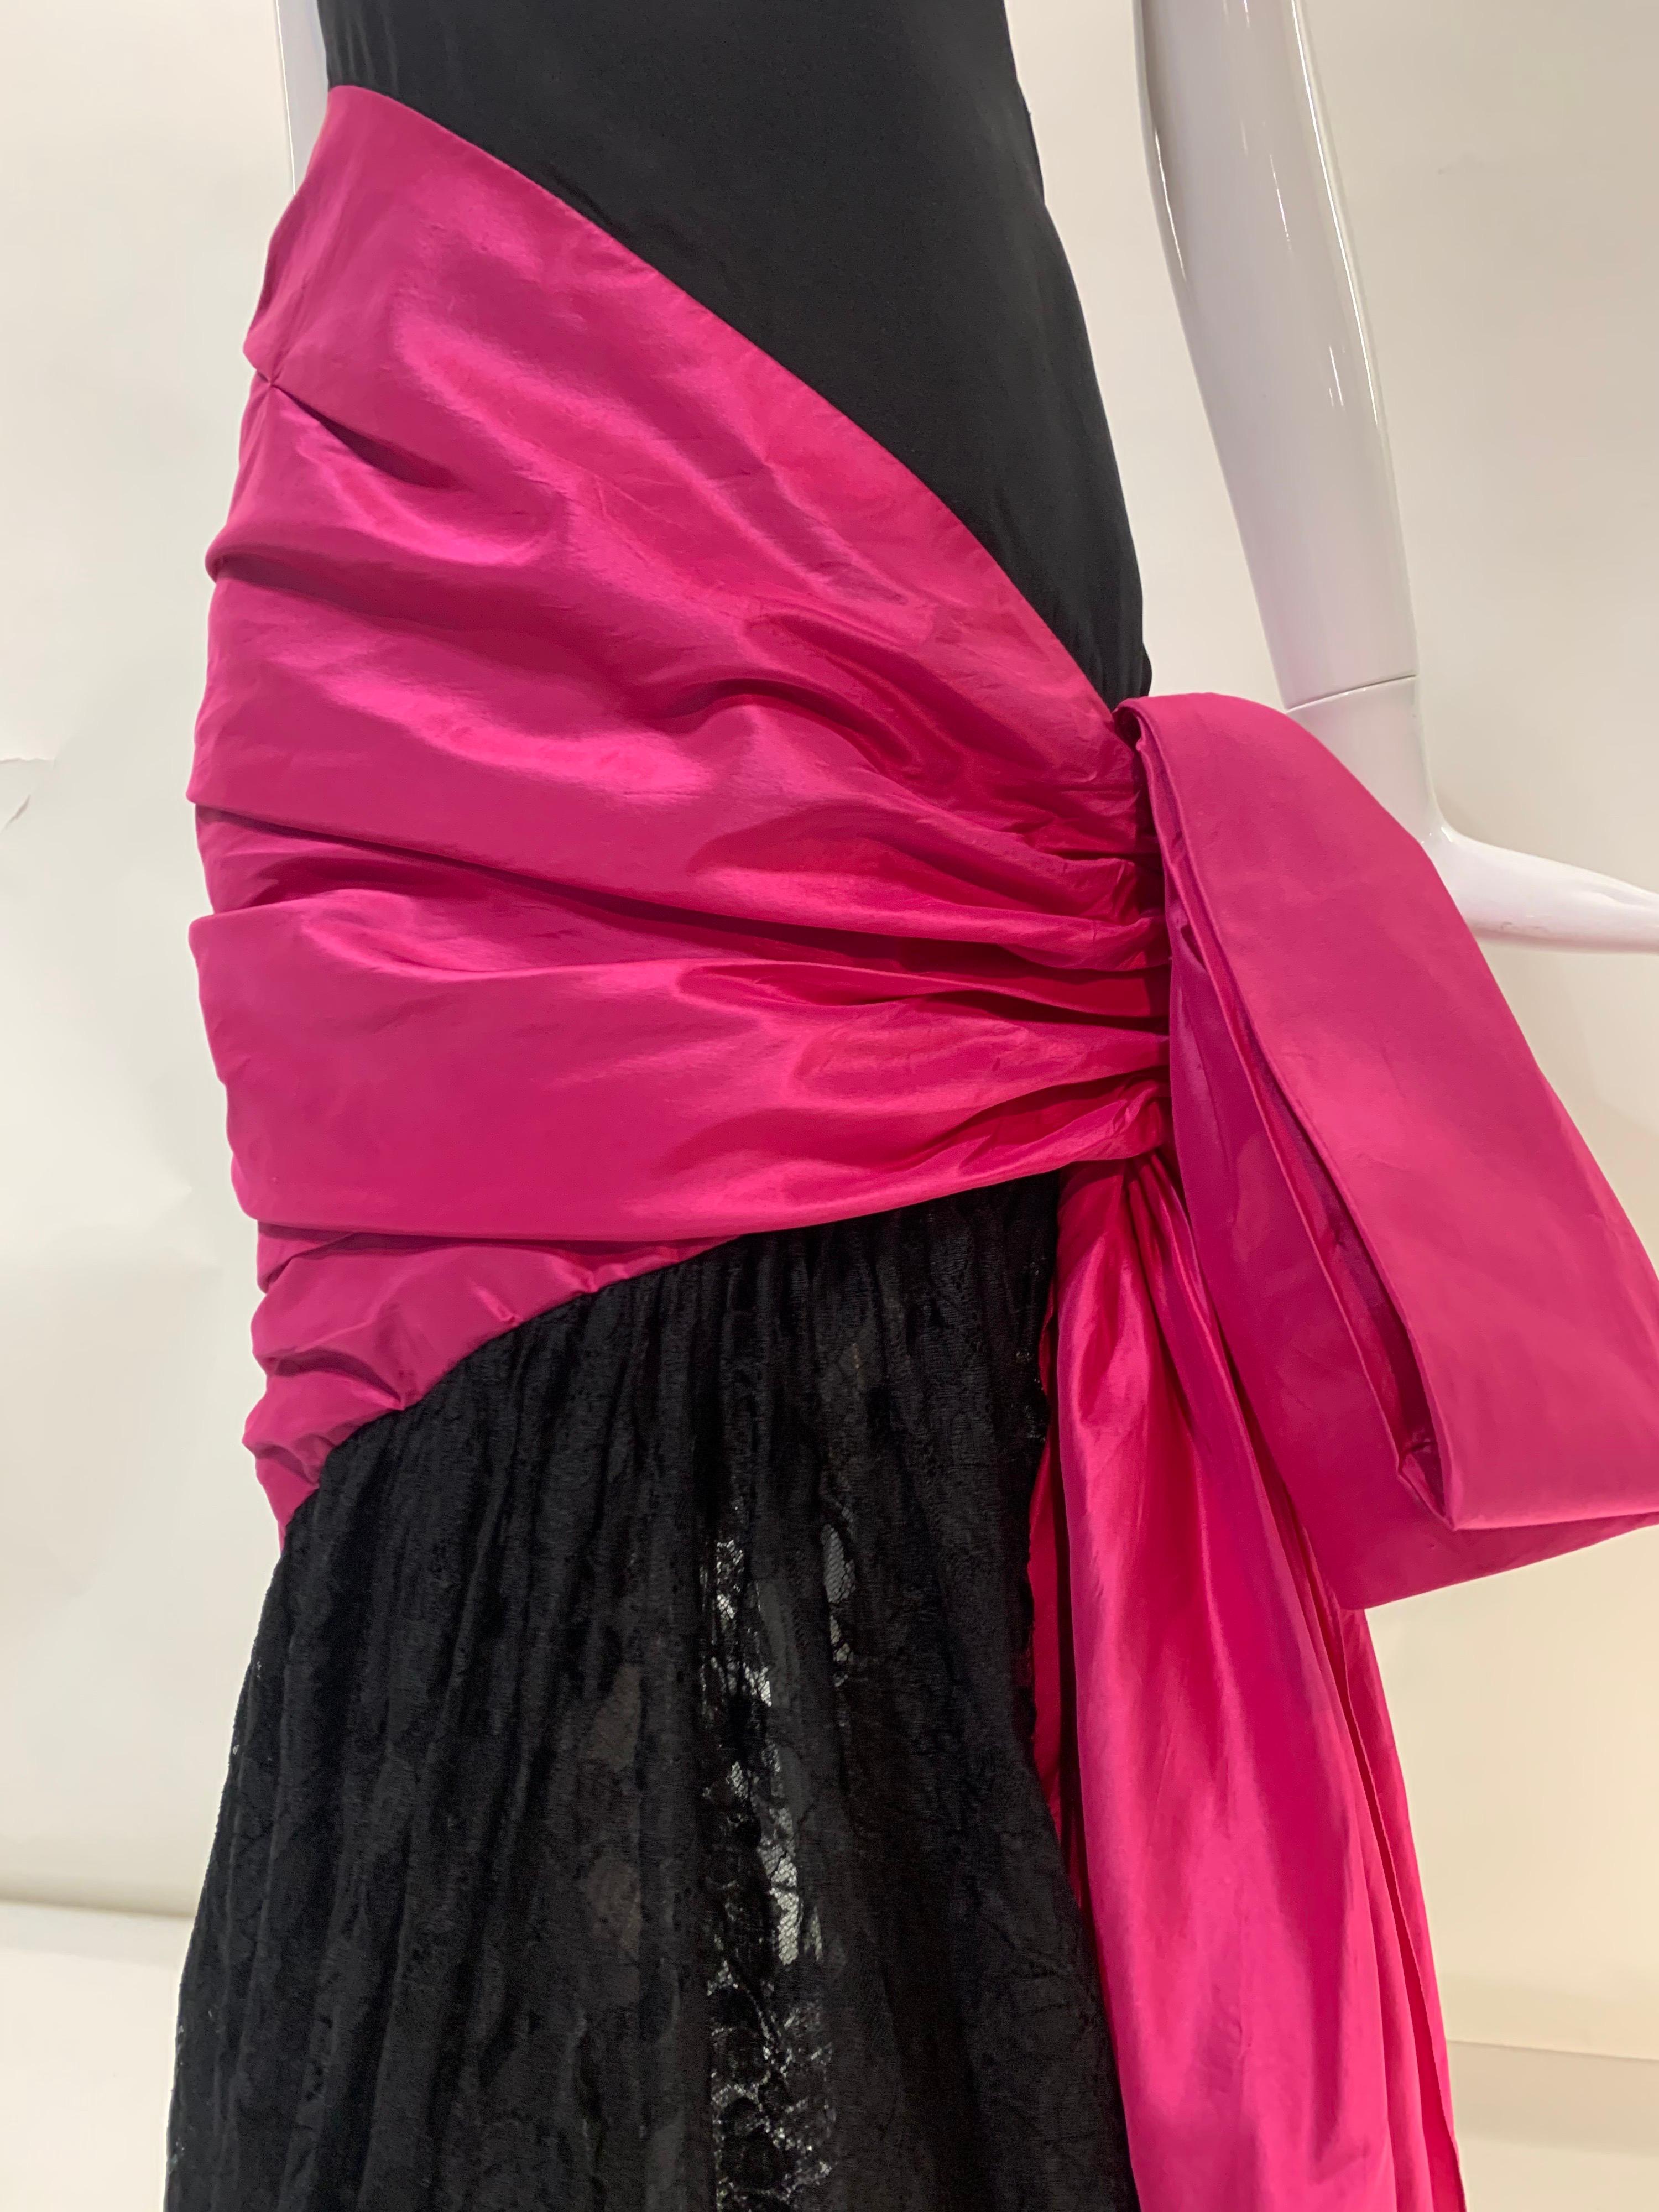 1980 Bill Blass Black Silk Crepe One-Shoulder Gown w/ Lace Skirt and Fuchsia Bow For Sale 1